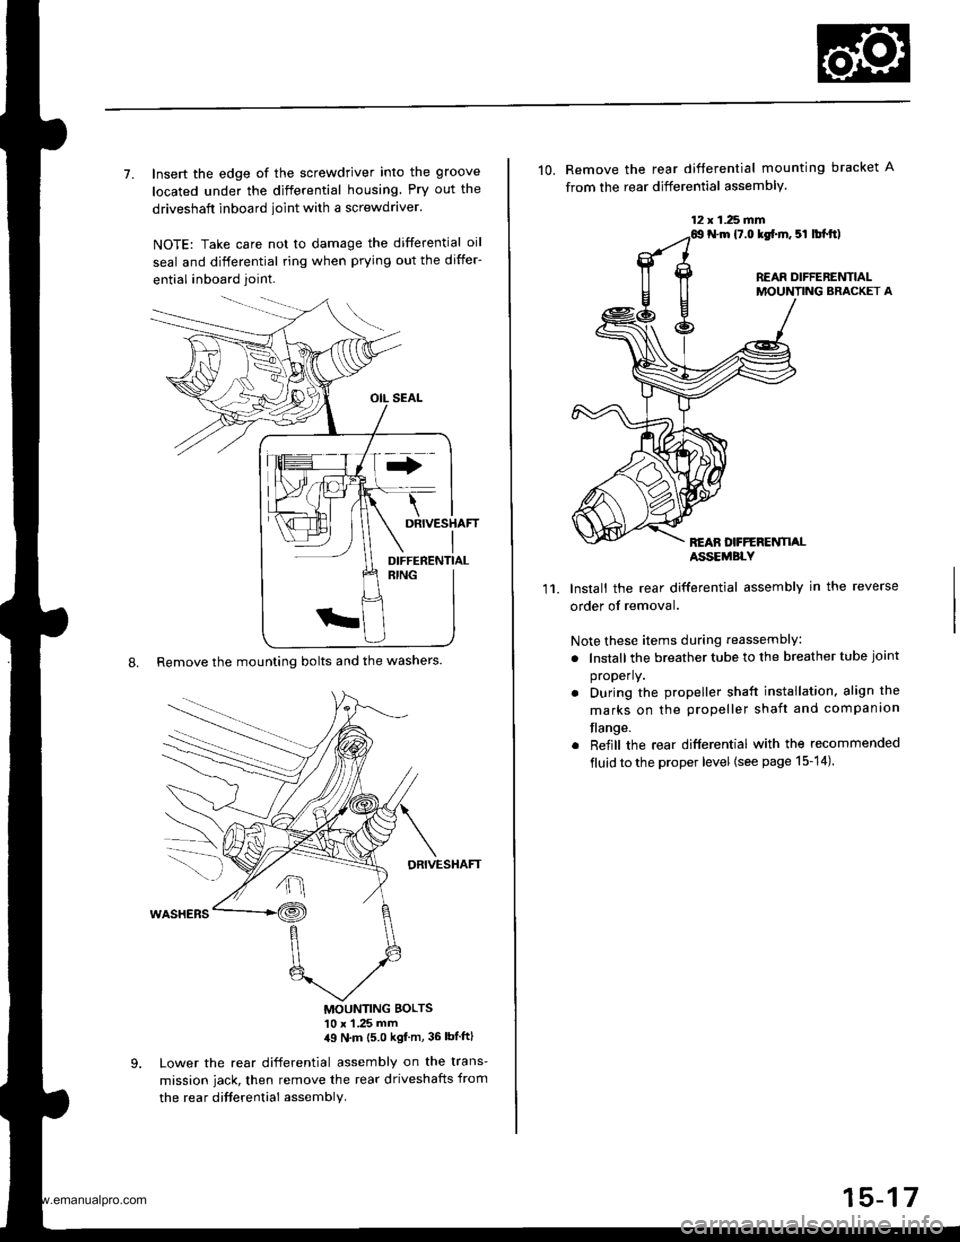 HONDA CR-V 1999 RD1-RD3 / 1.G Workshop Manual 
7. Insert the edge of the screwdriver into the groove
located under the differential housing Pry out the
driveshaft inboard ioint with a screwdraver.
NOTE: Take care not to damage the differential oi